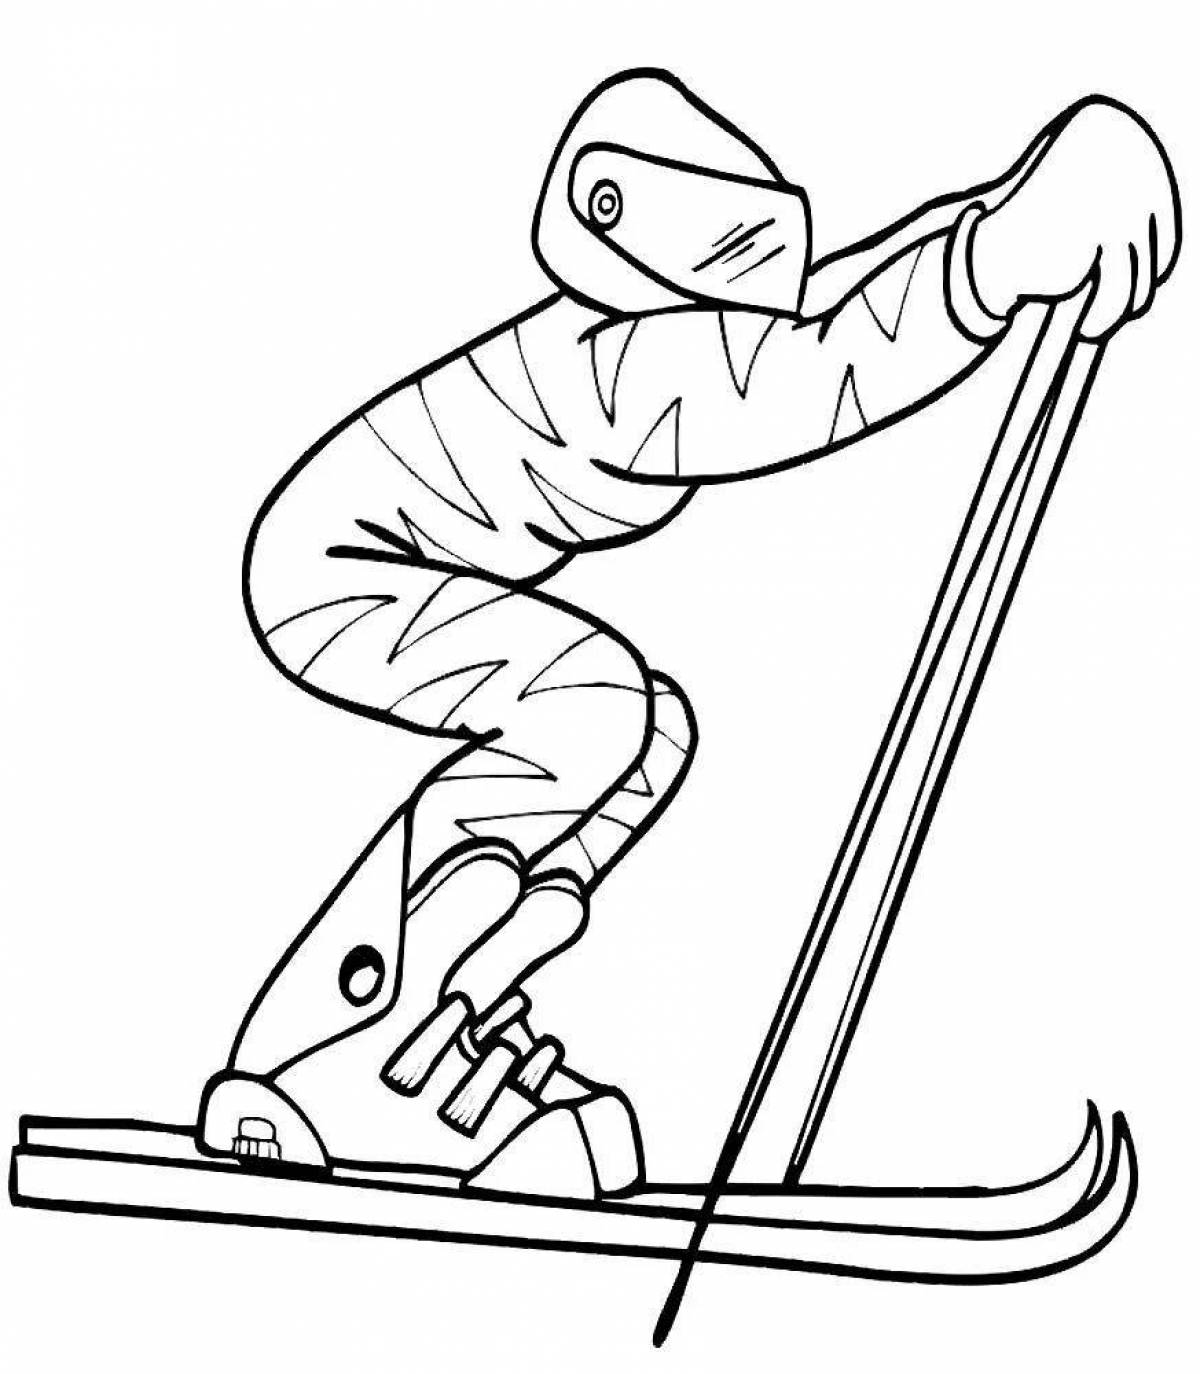 Coloring book shiny skis